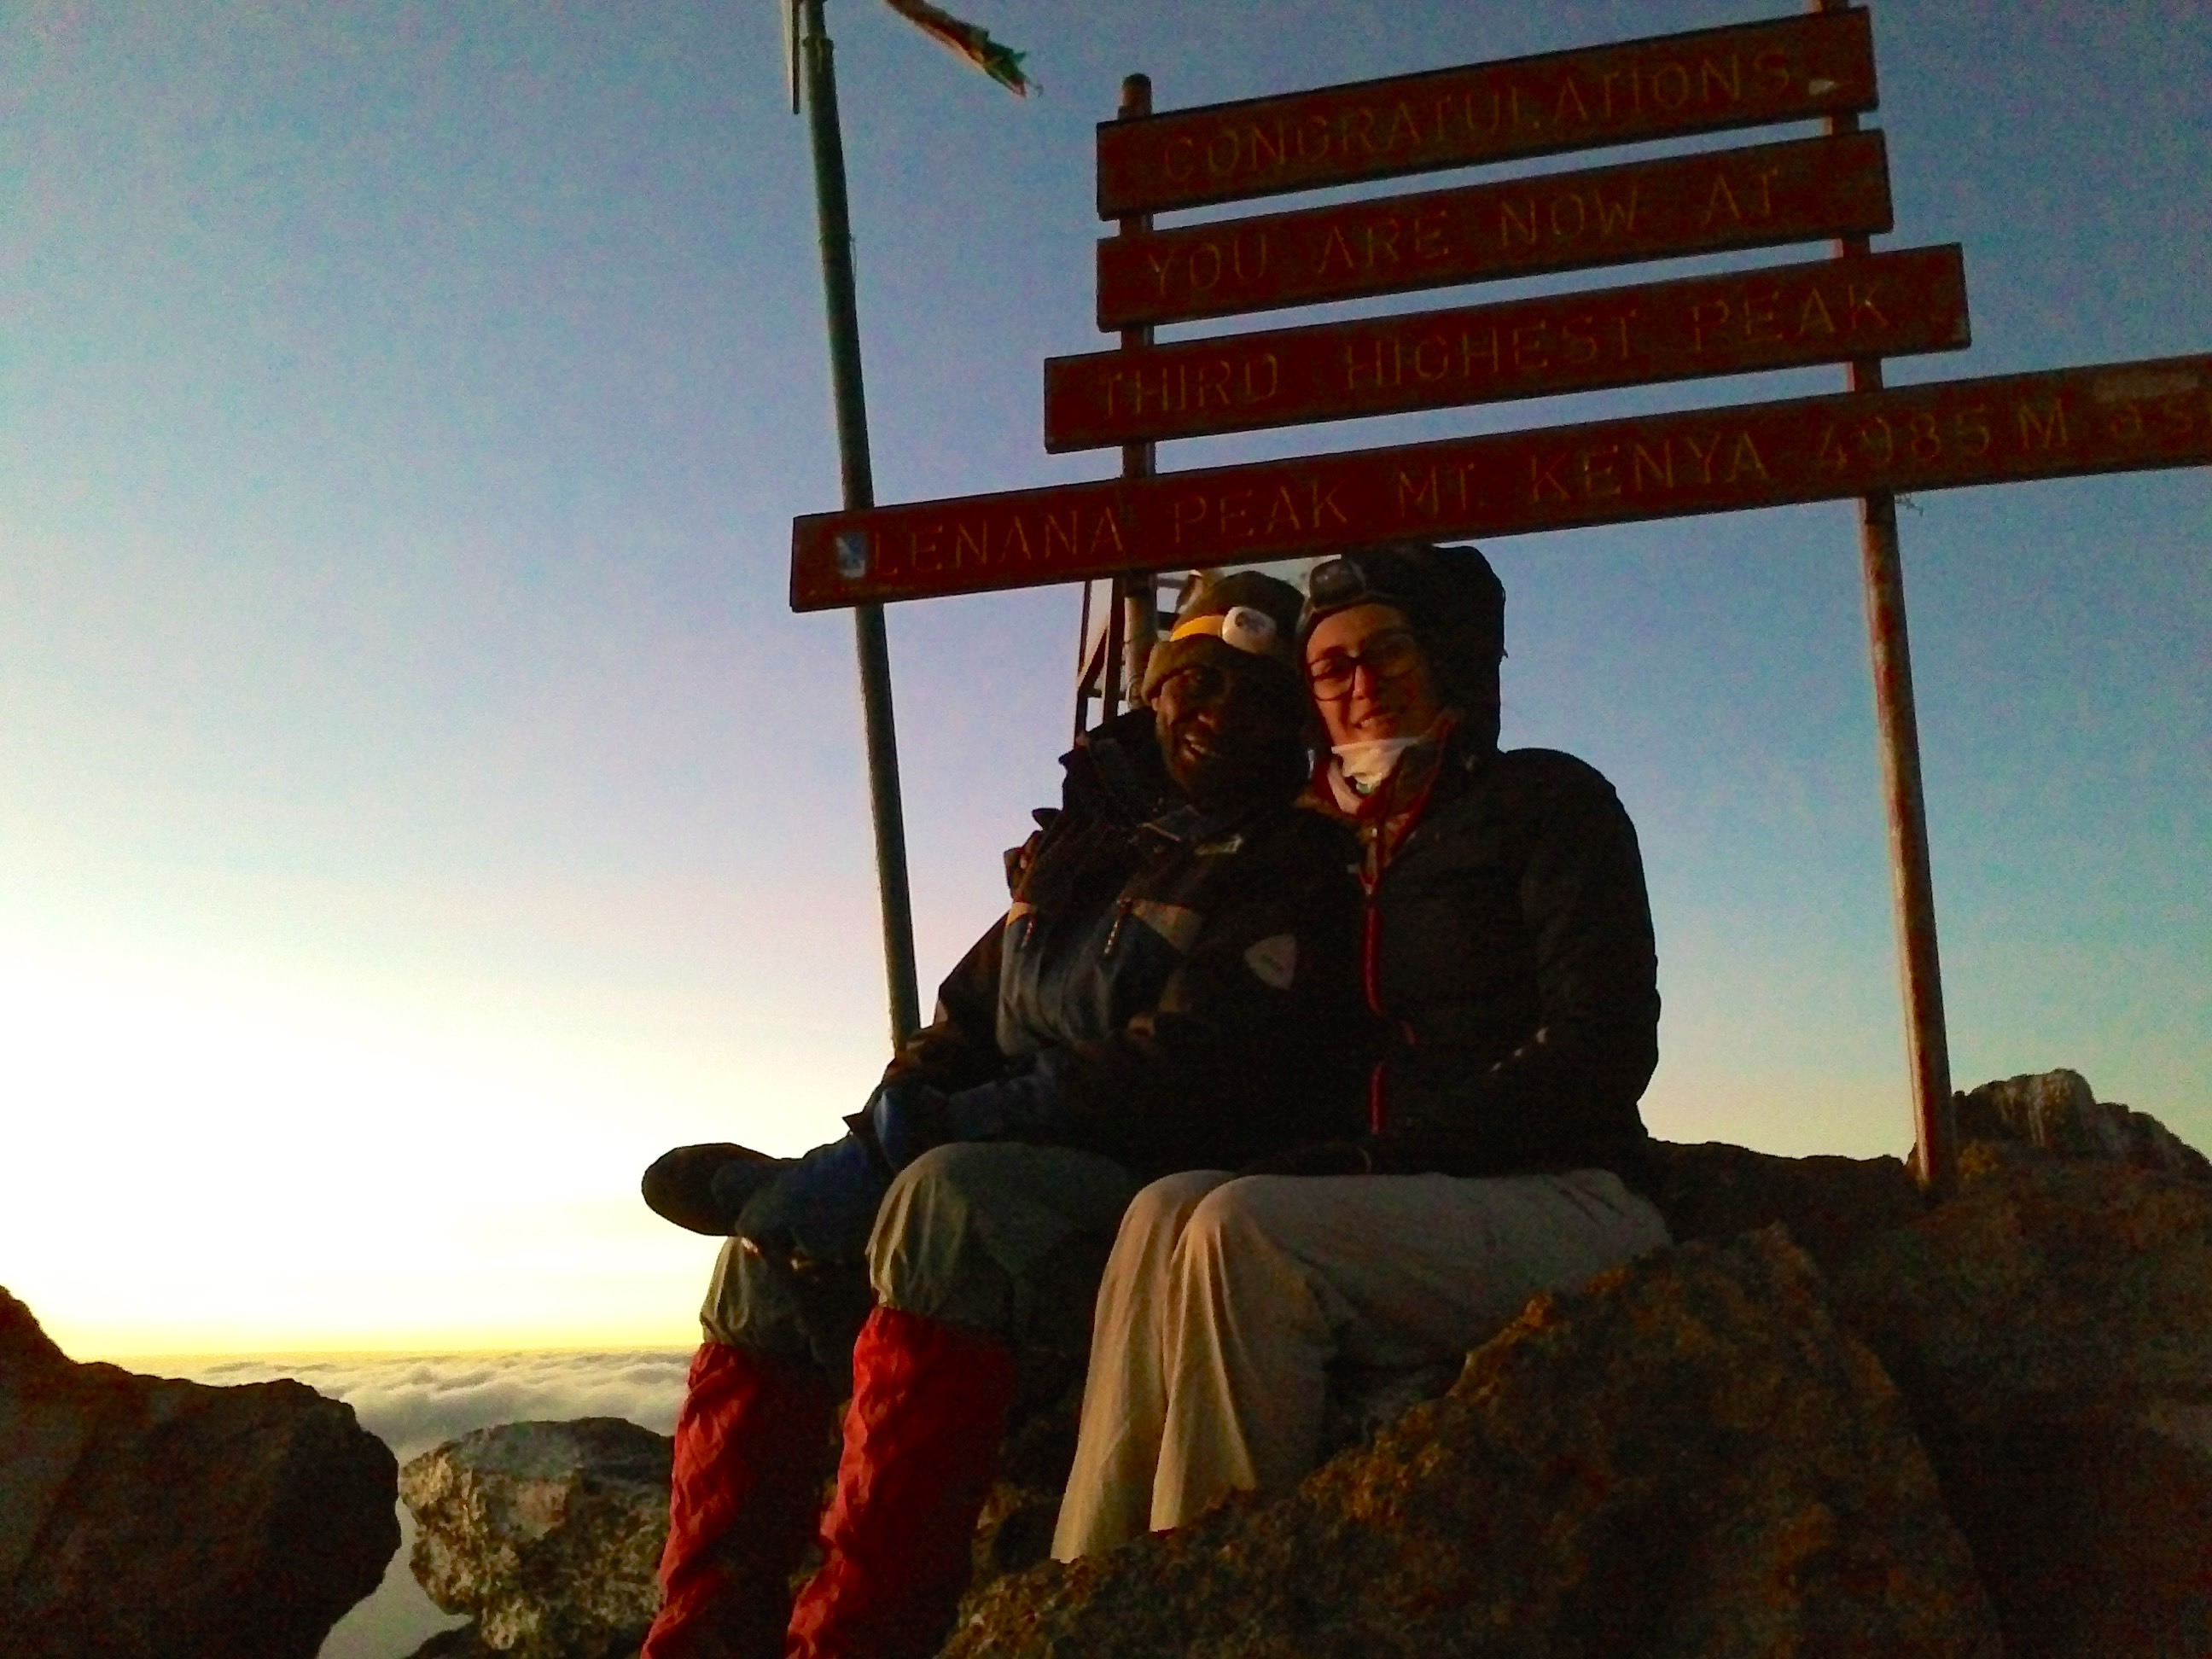 On top of Mont Lenana – 4985 m